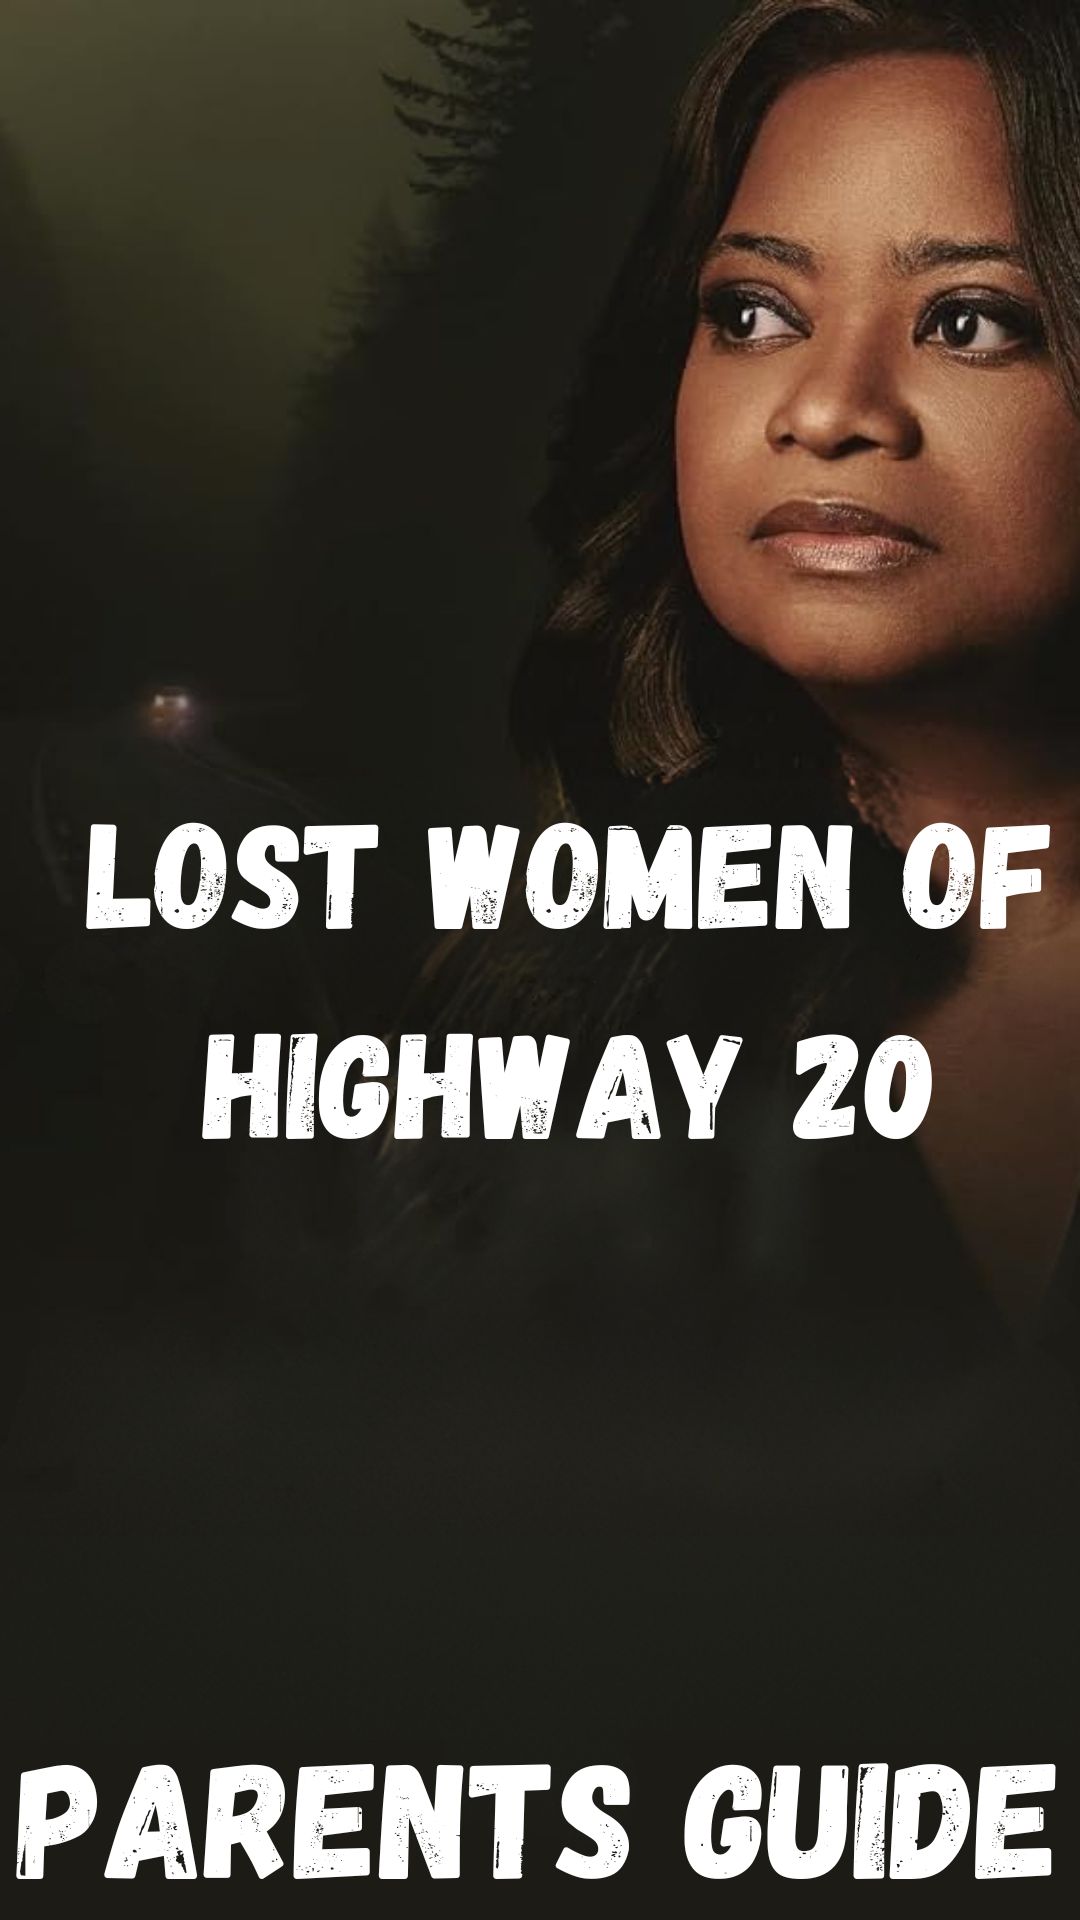 Lost Women of Highway 20 Parents Guide (1)